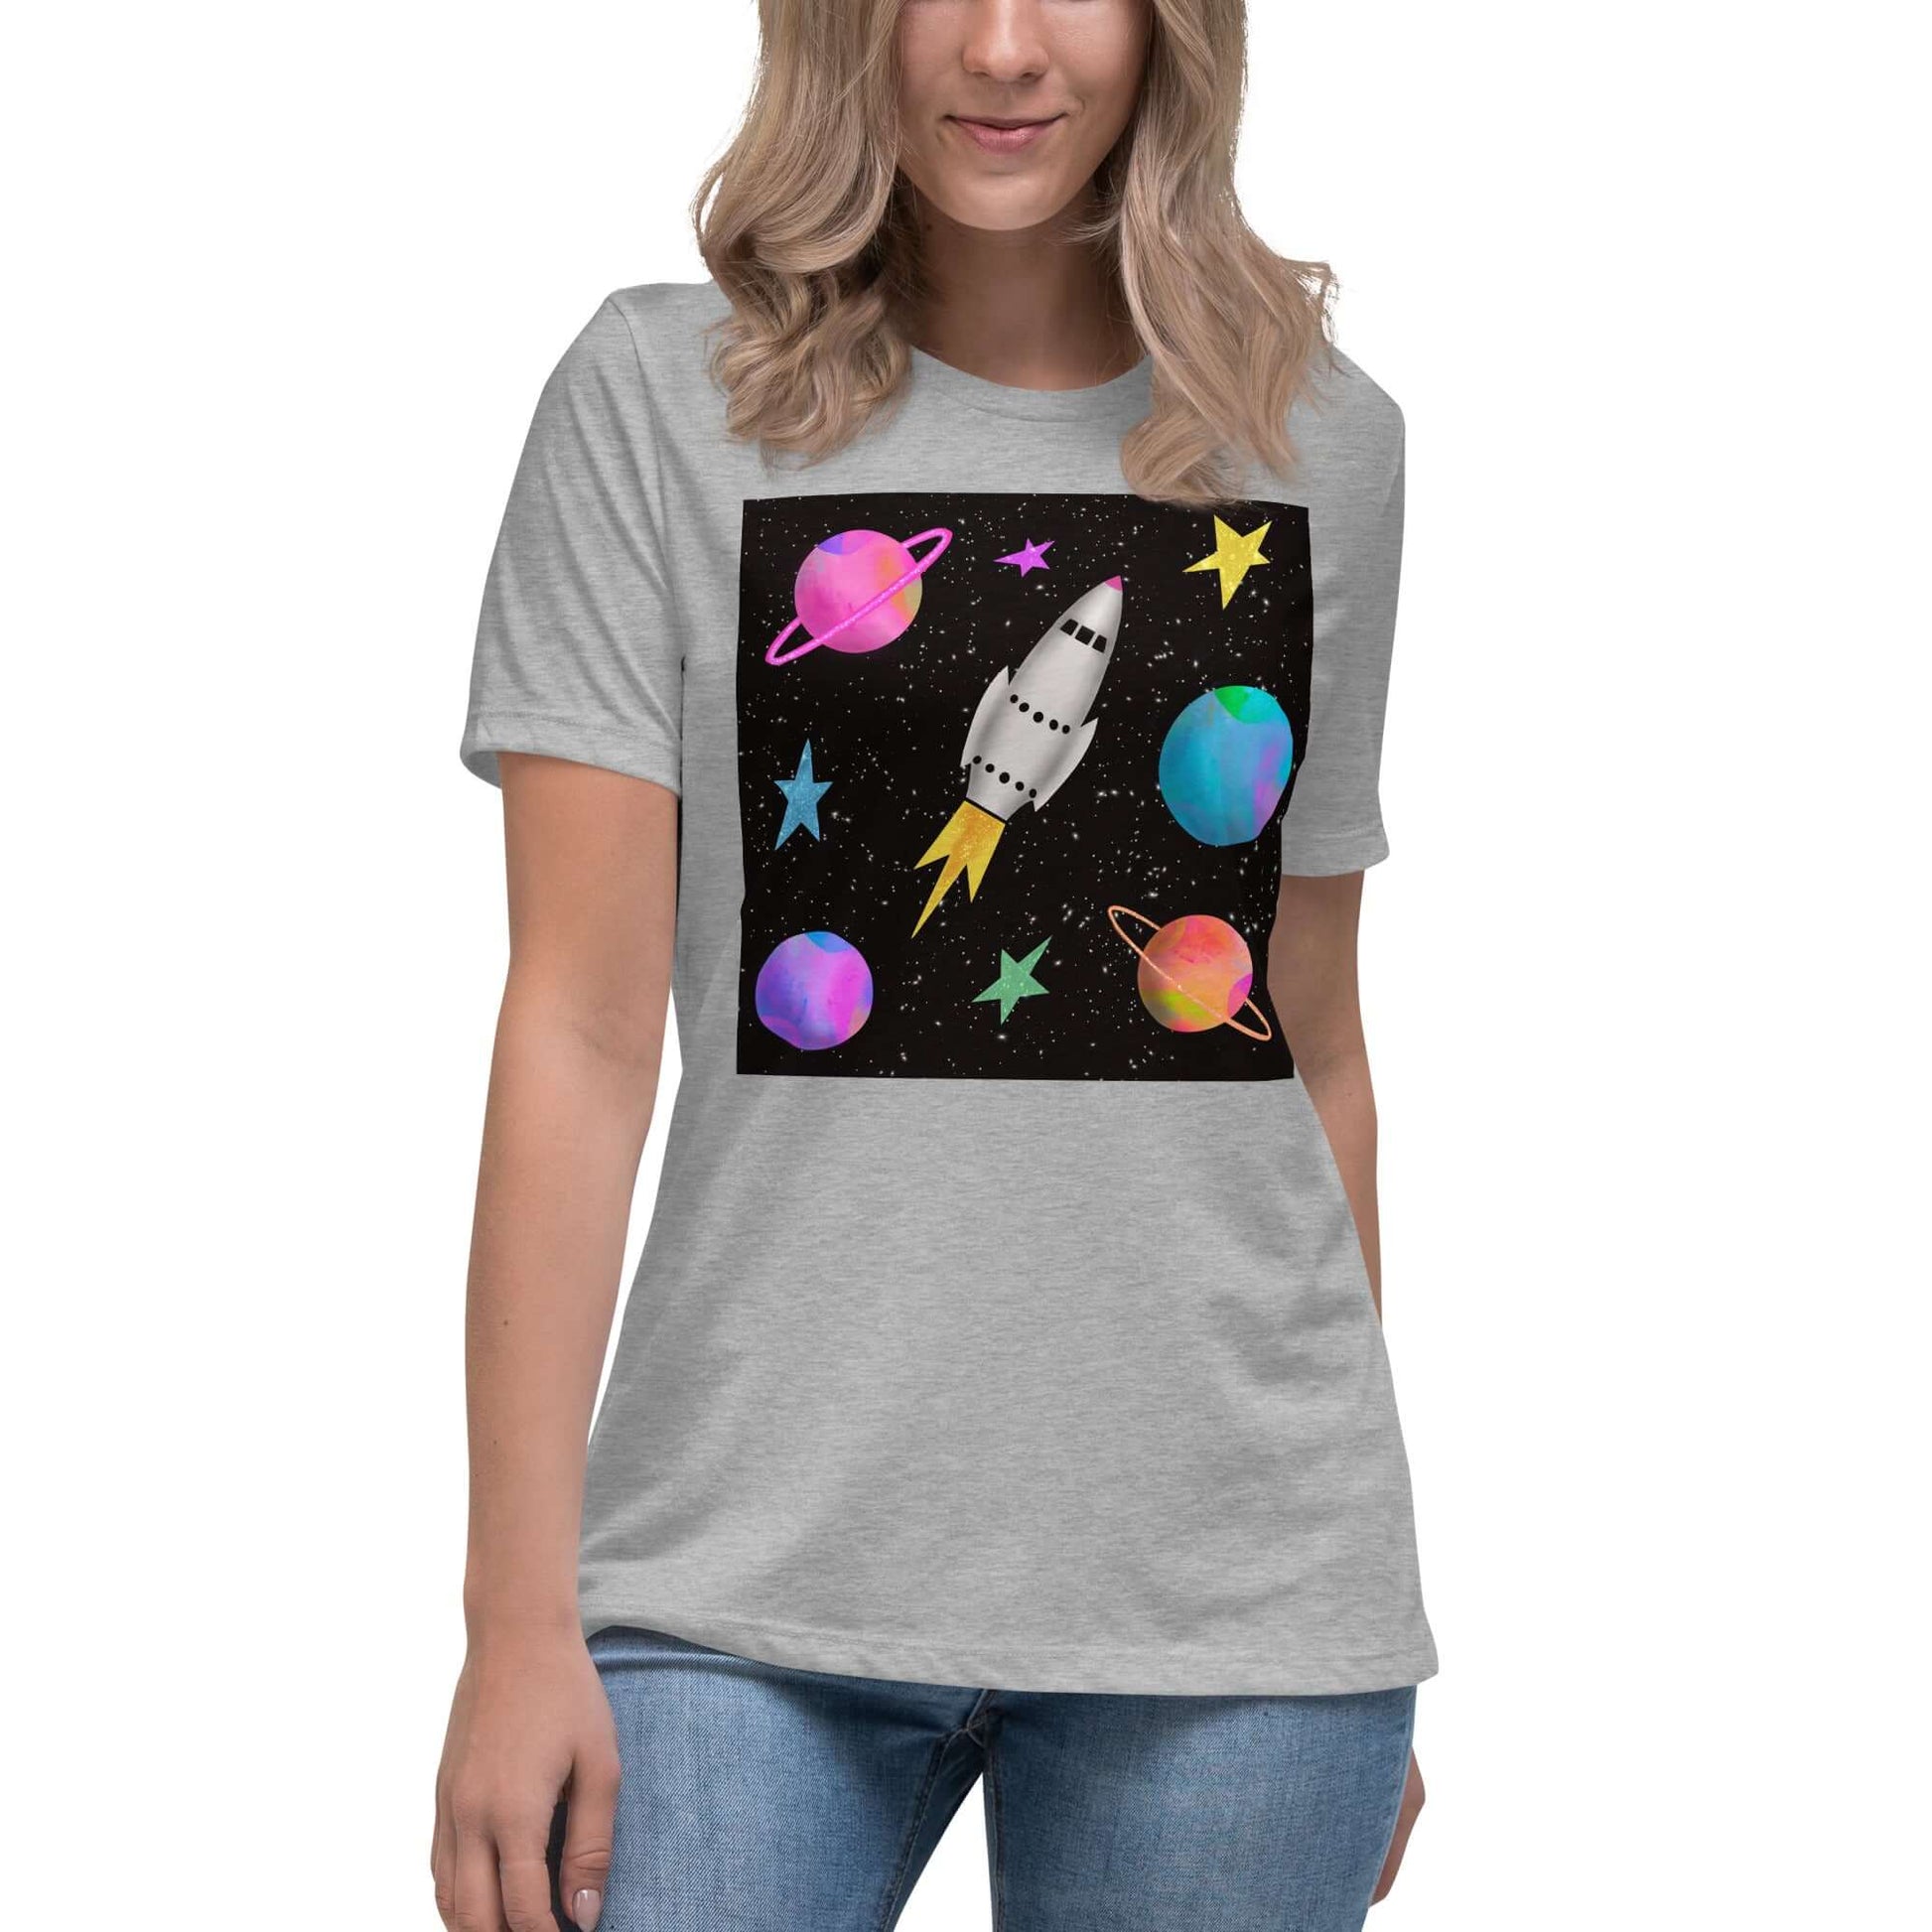 Rocket with Colorful Stars and Planets “Space Rockets” Women’s Short Sleeve Tee in Athletic Heather Gray